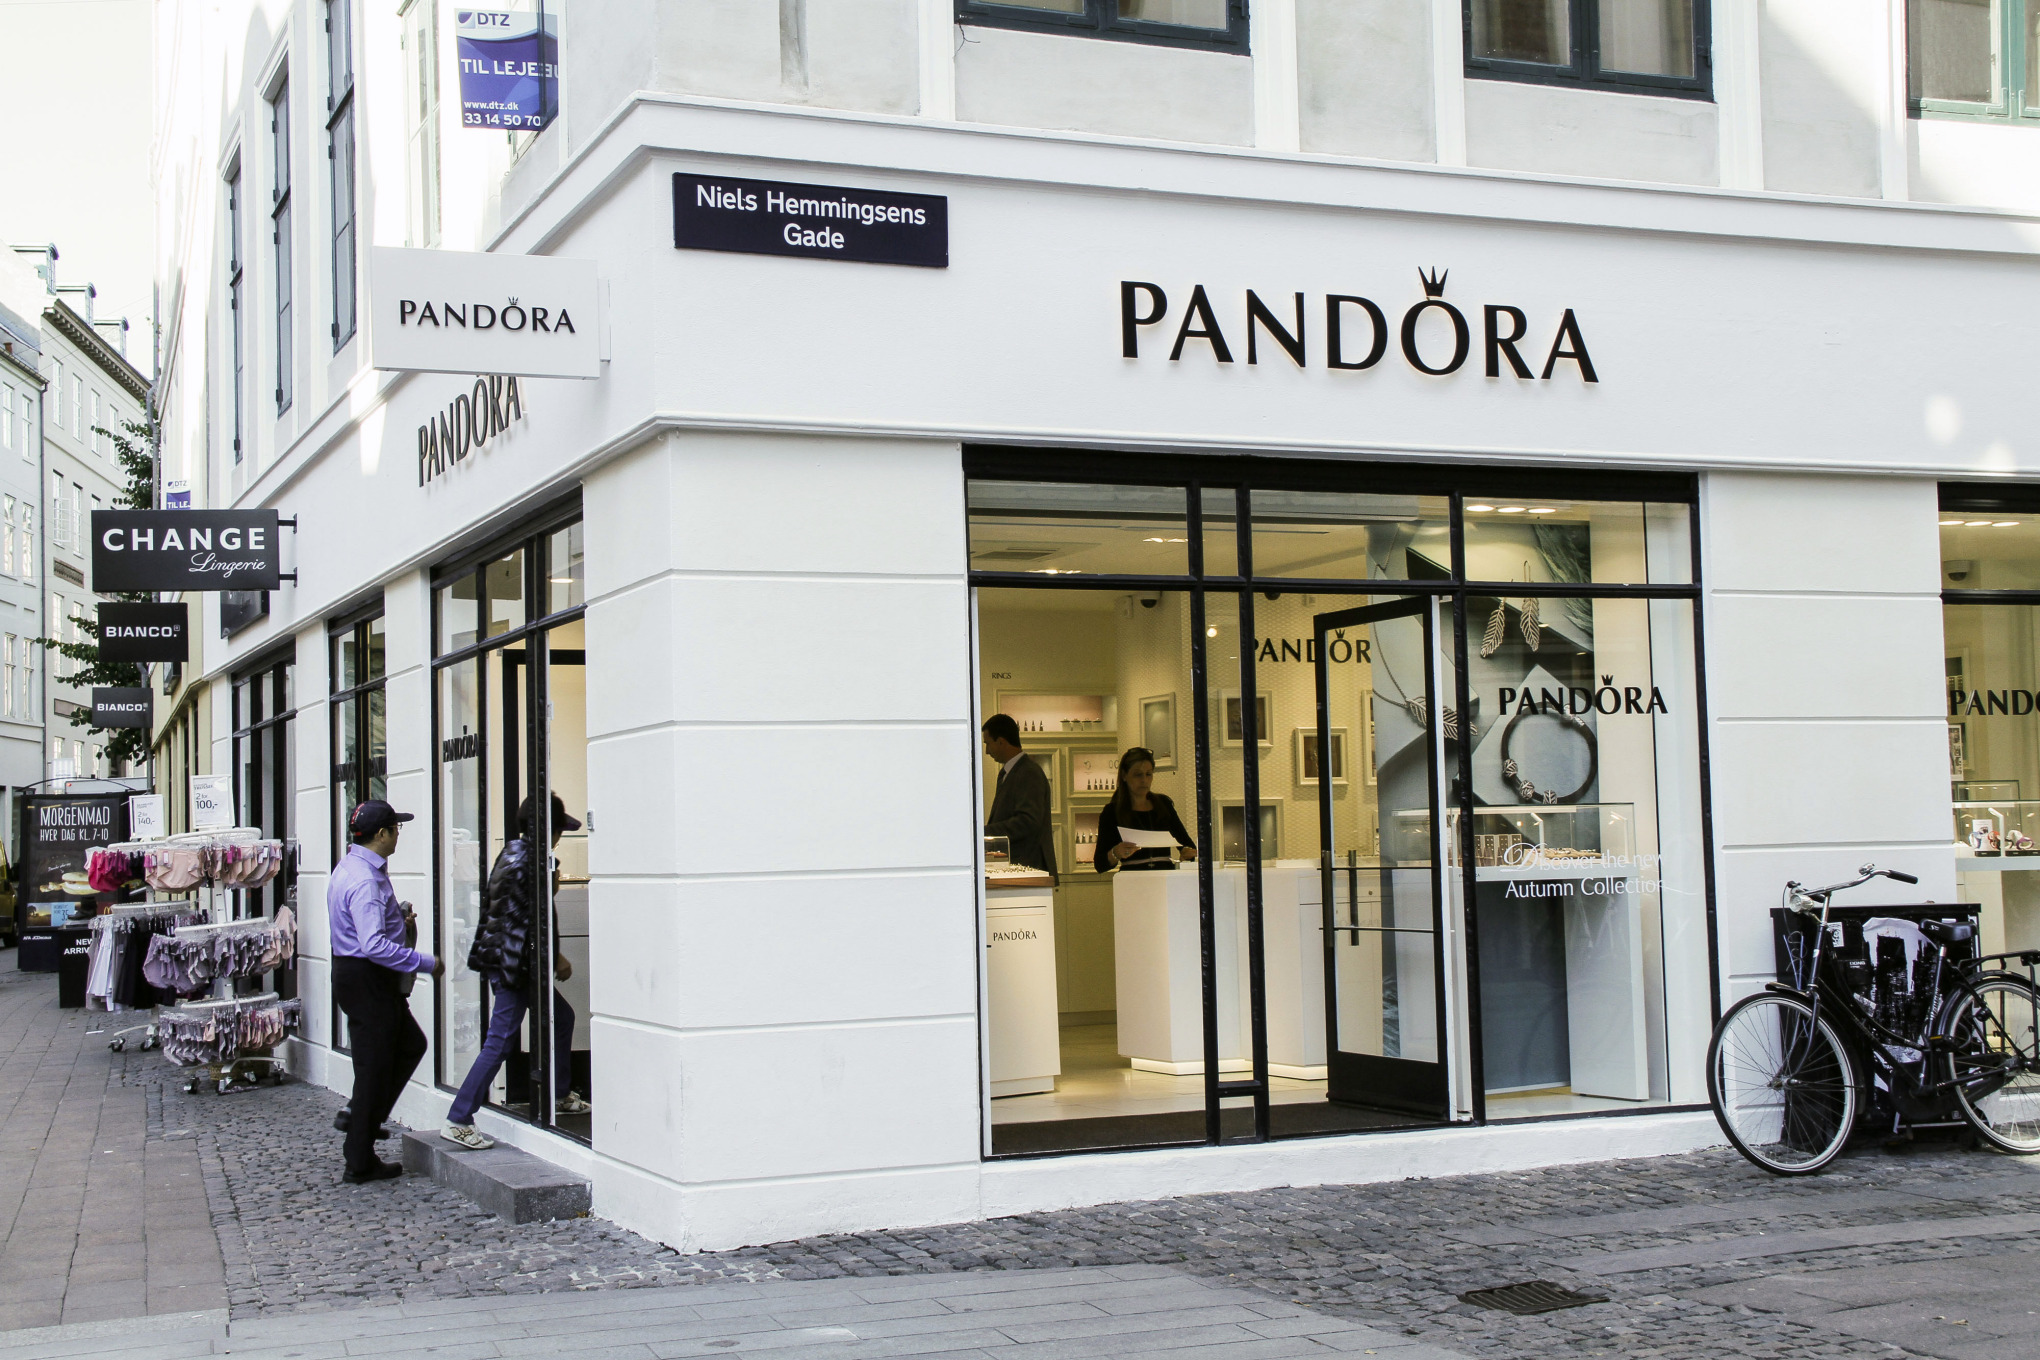 Hvem Fristelse Cruelty The Worst Day Since 2011 Leaves Pandora A/S Investors in Shock - Bloomberg